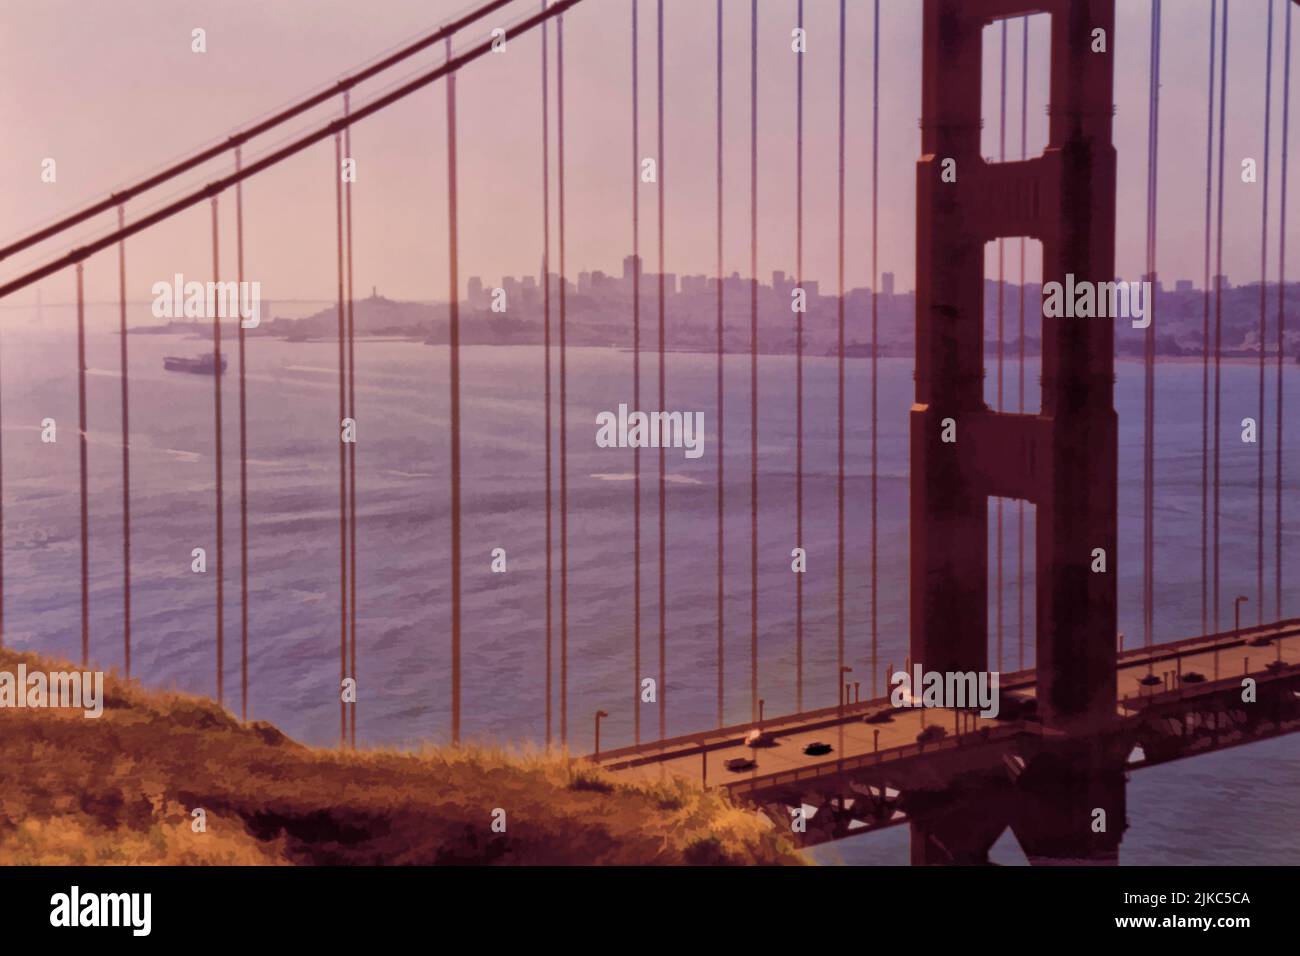 Golden gate bridge with San Francisco in the background. Stock Photo